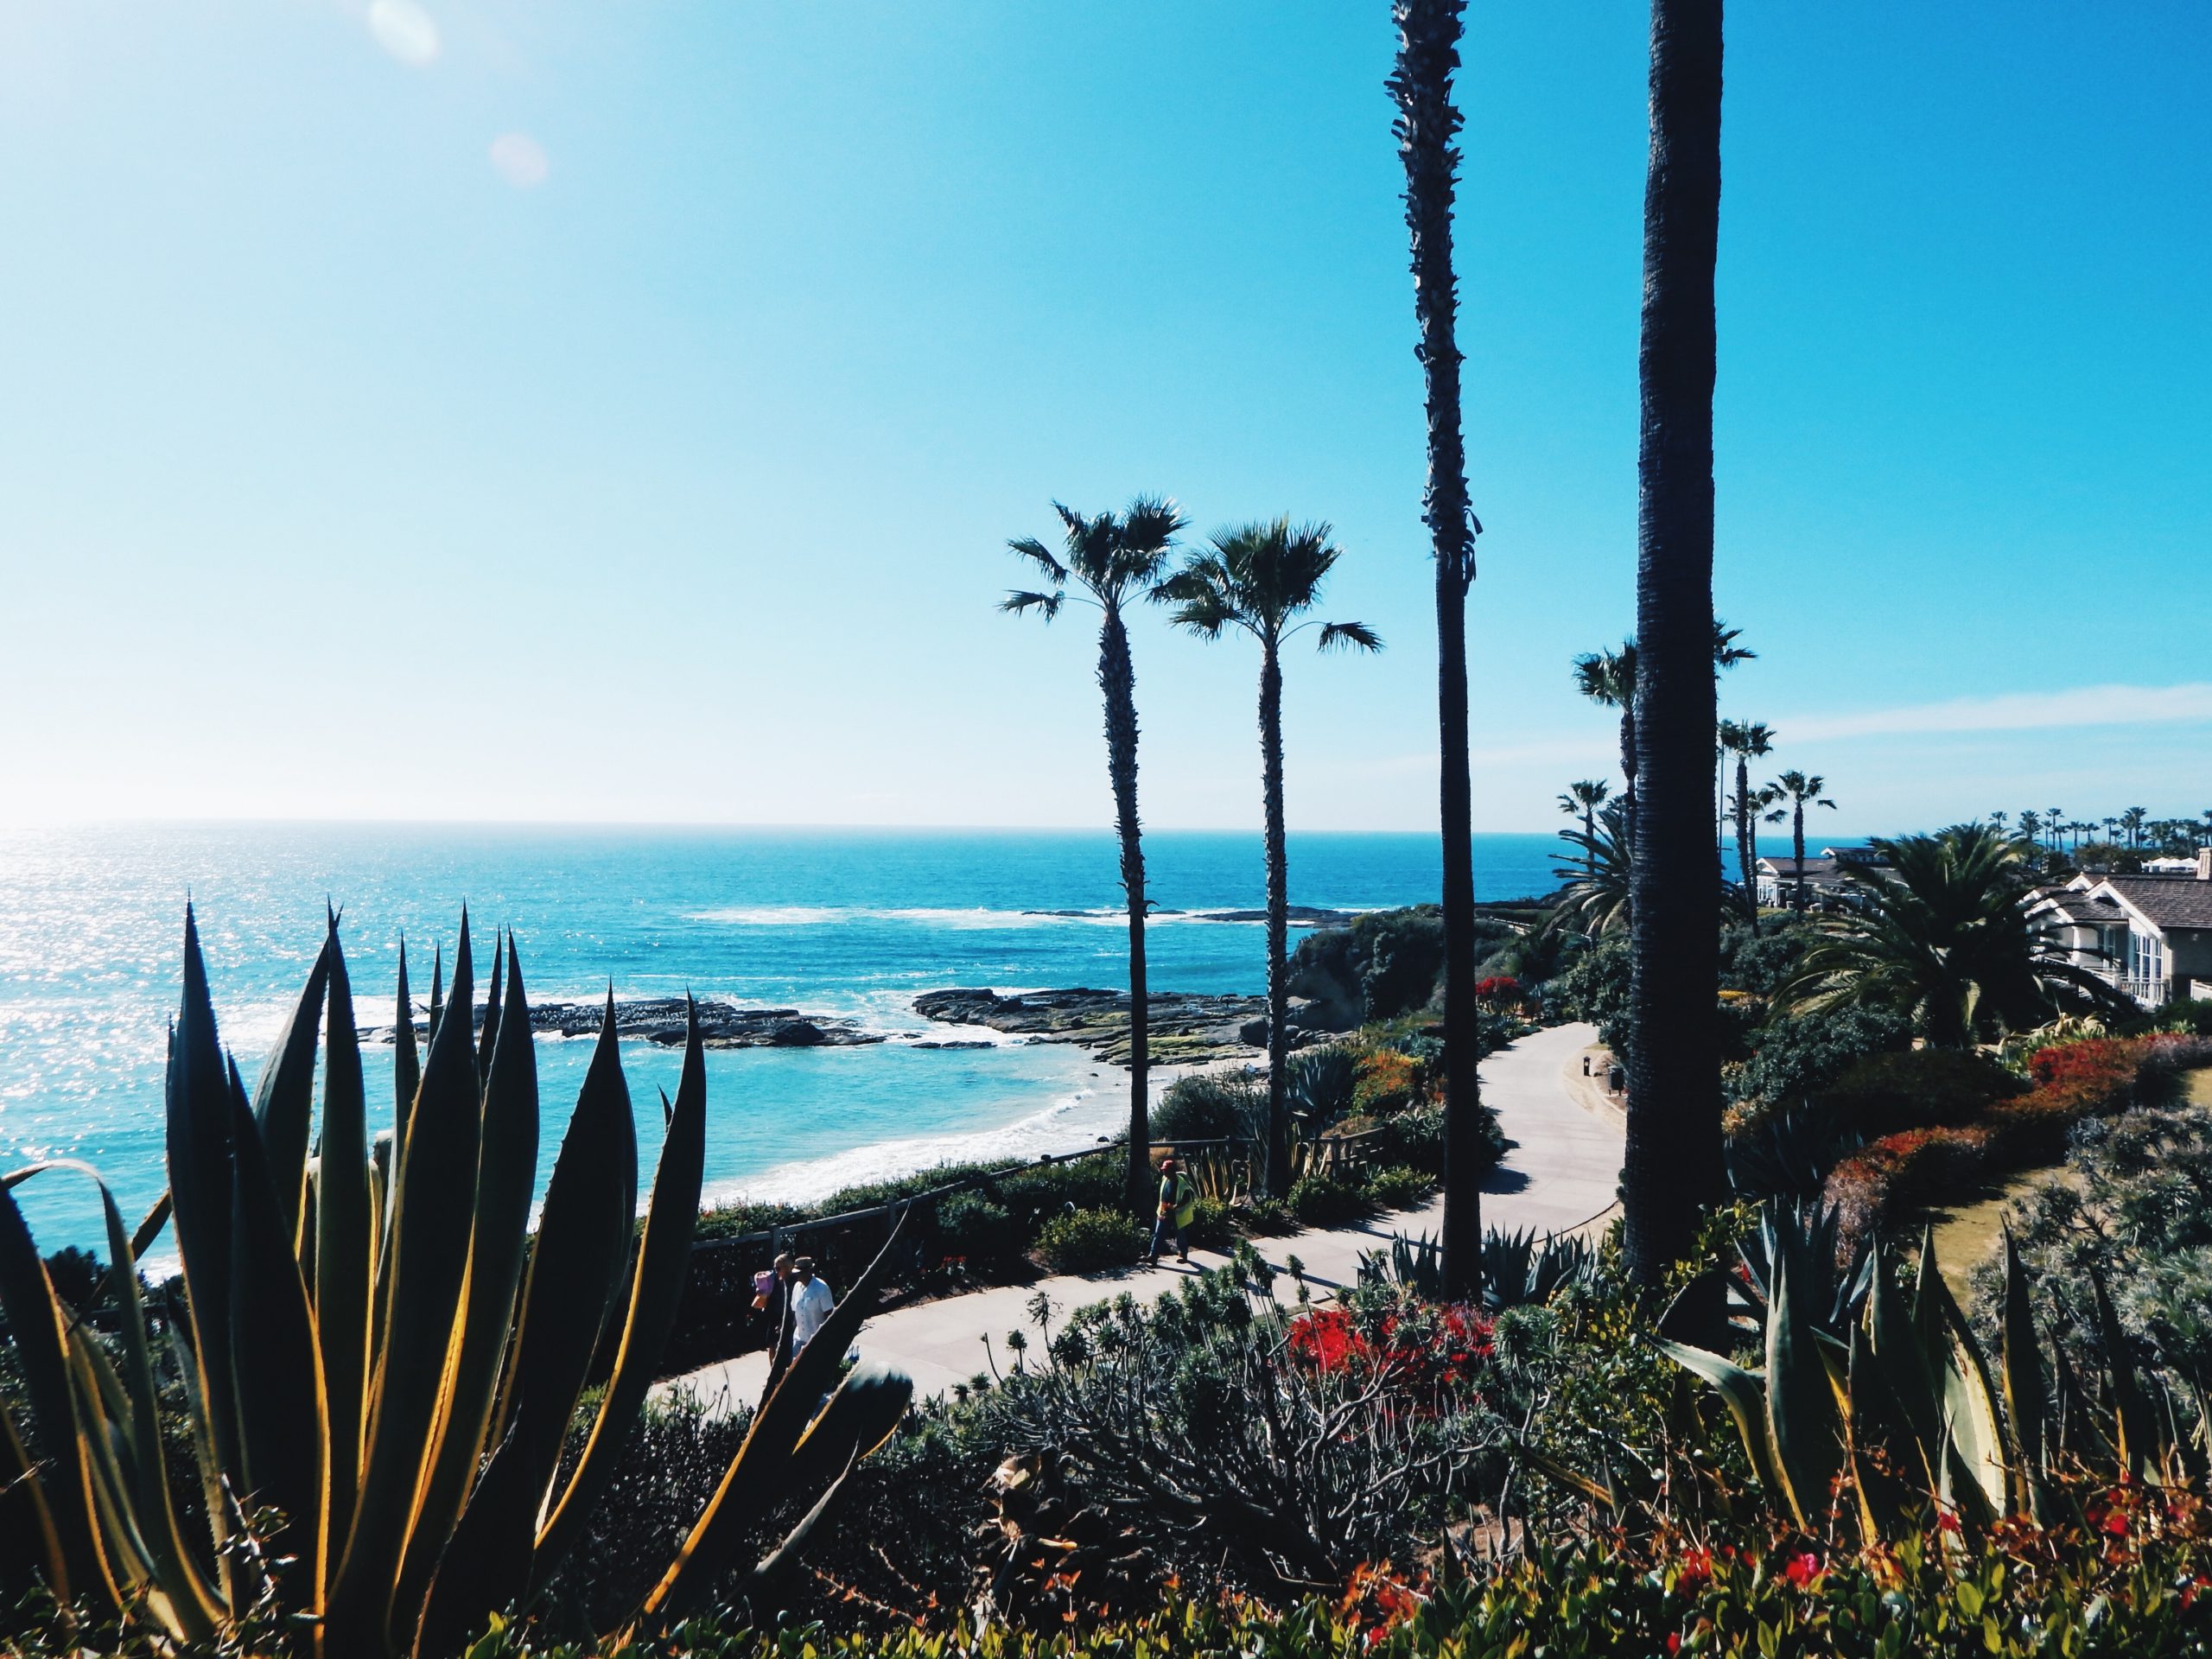 Take Your East Coast Business to the West with a California Virtual Office